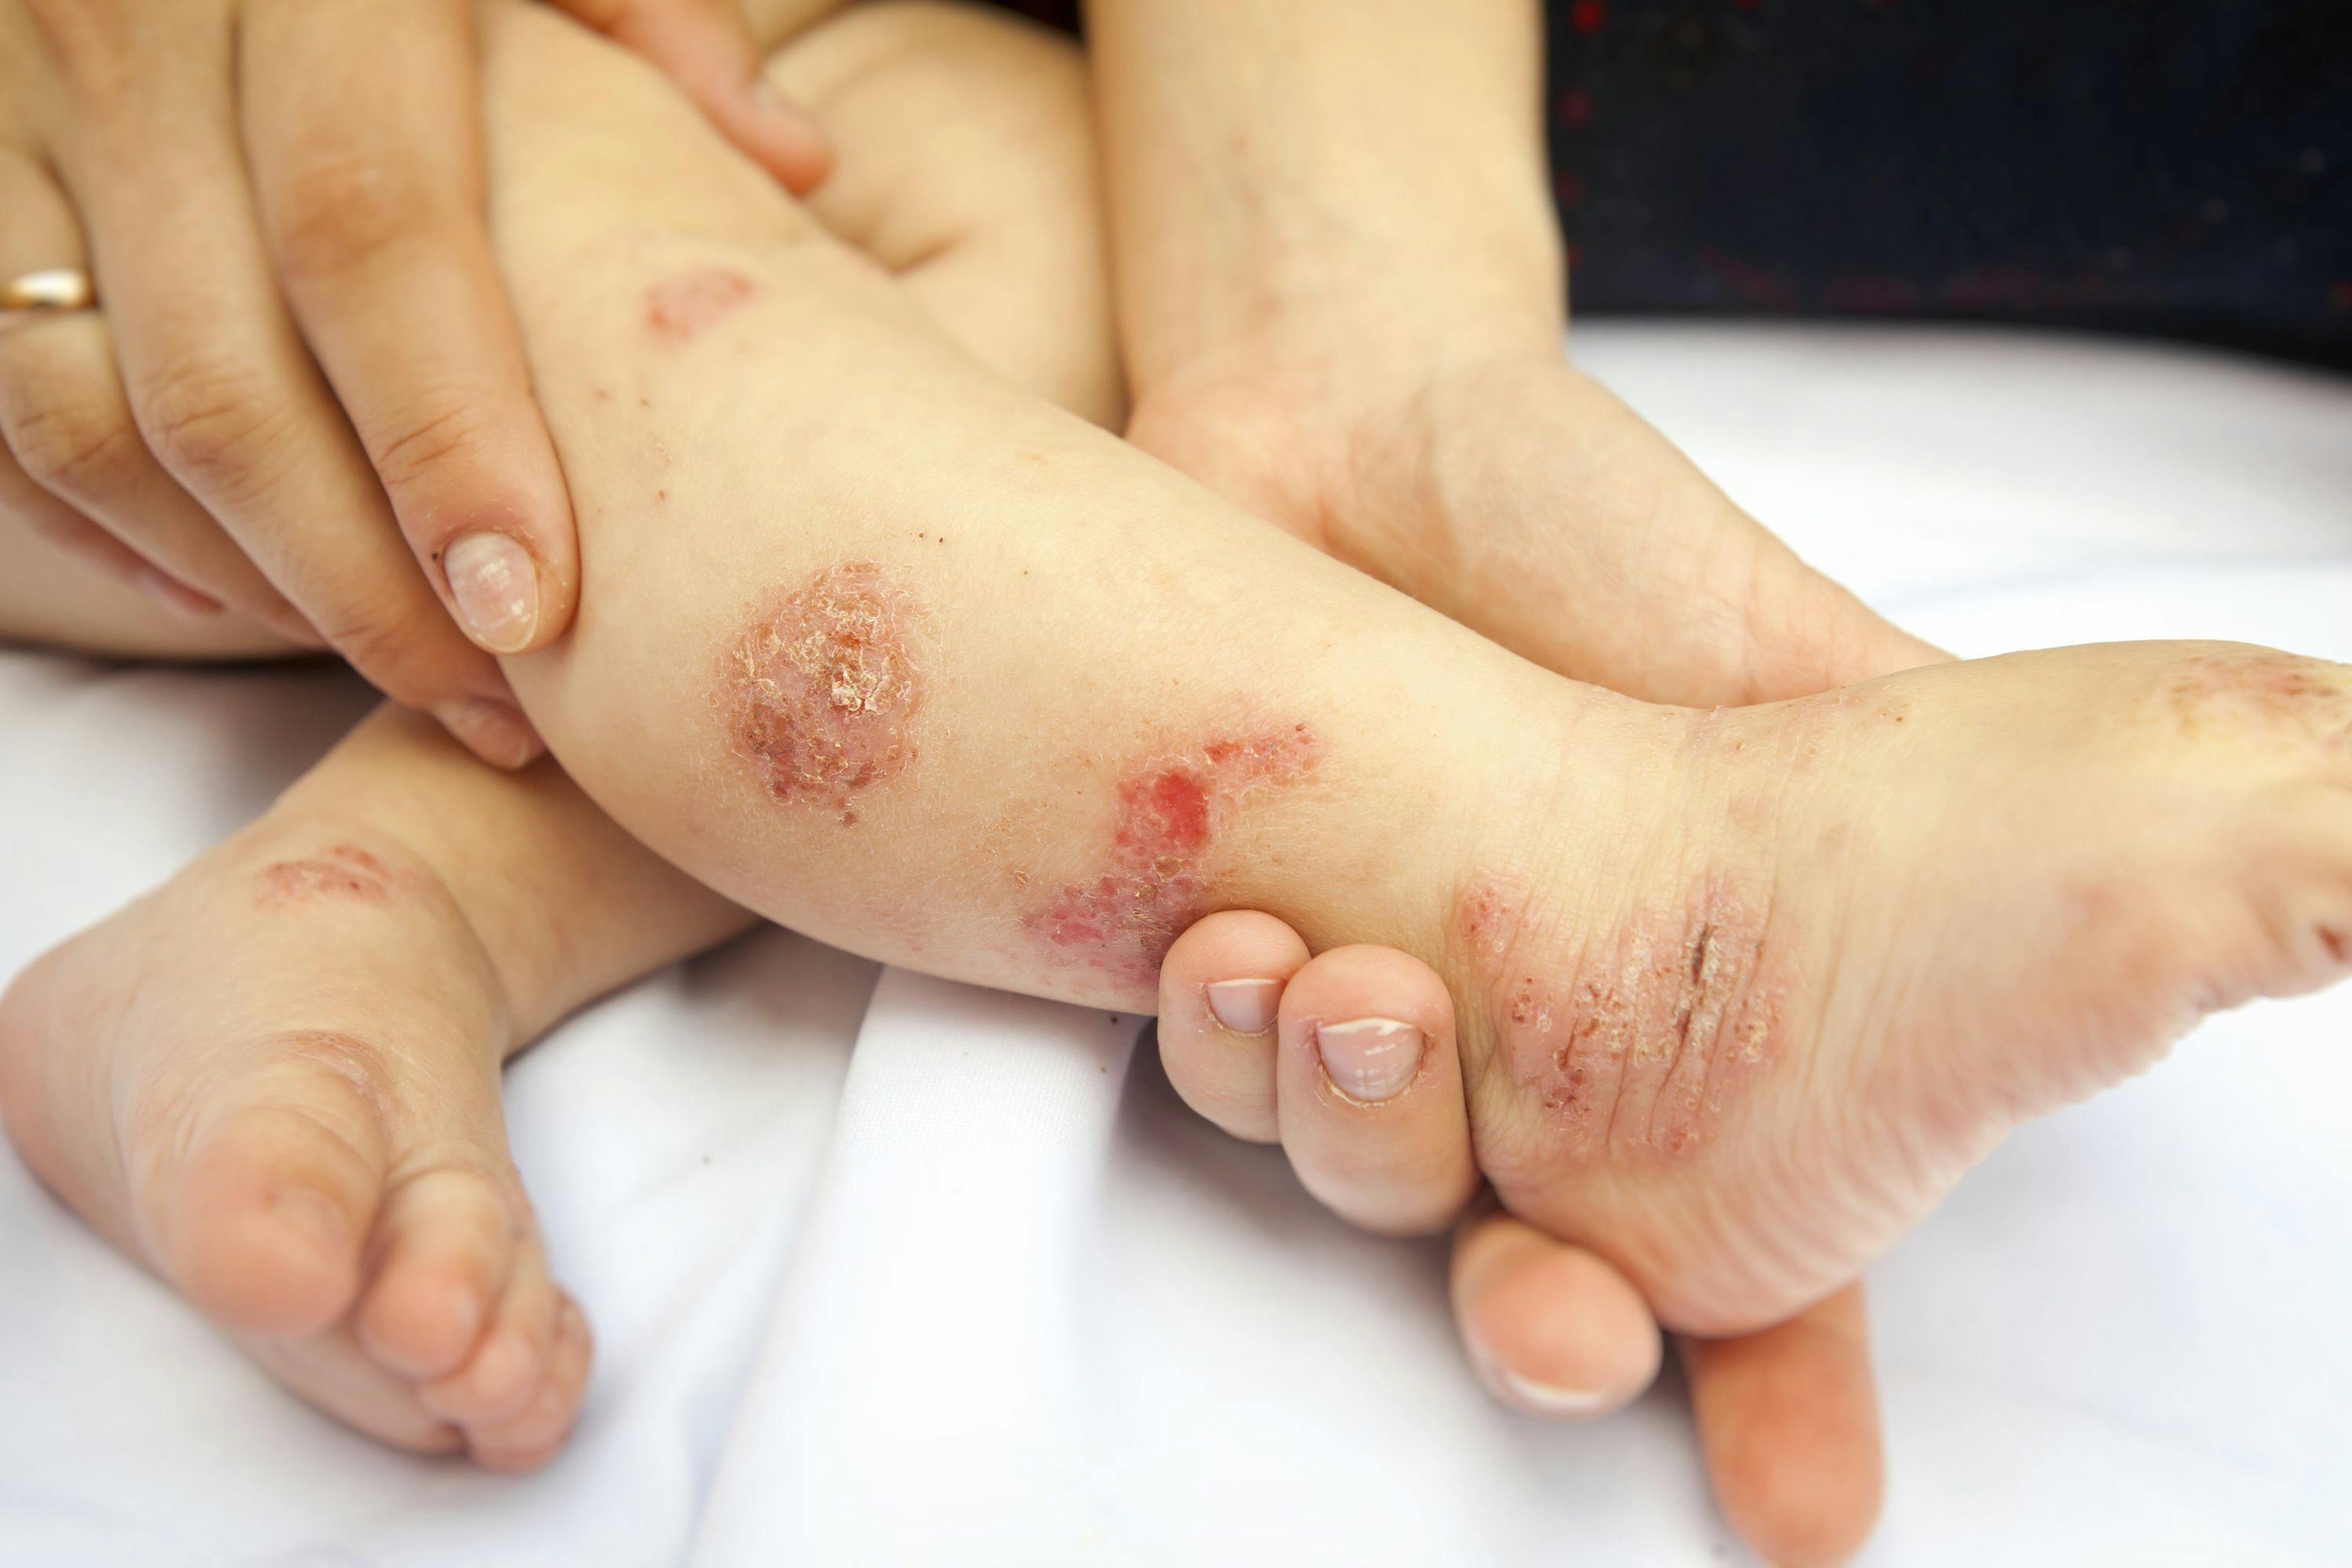 FDA Accepts Dupixent for Priority Review in Young Children With Atopic Dermatitis